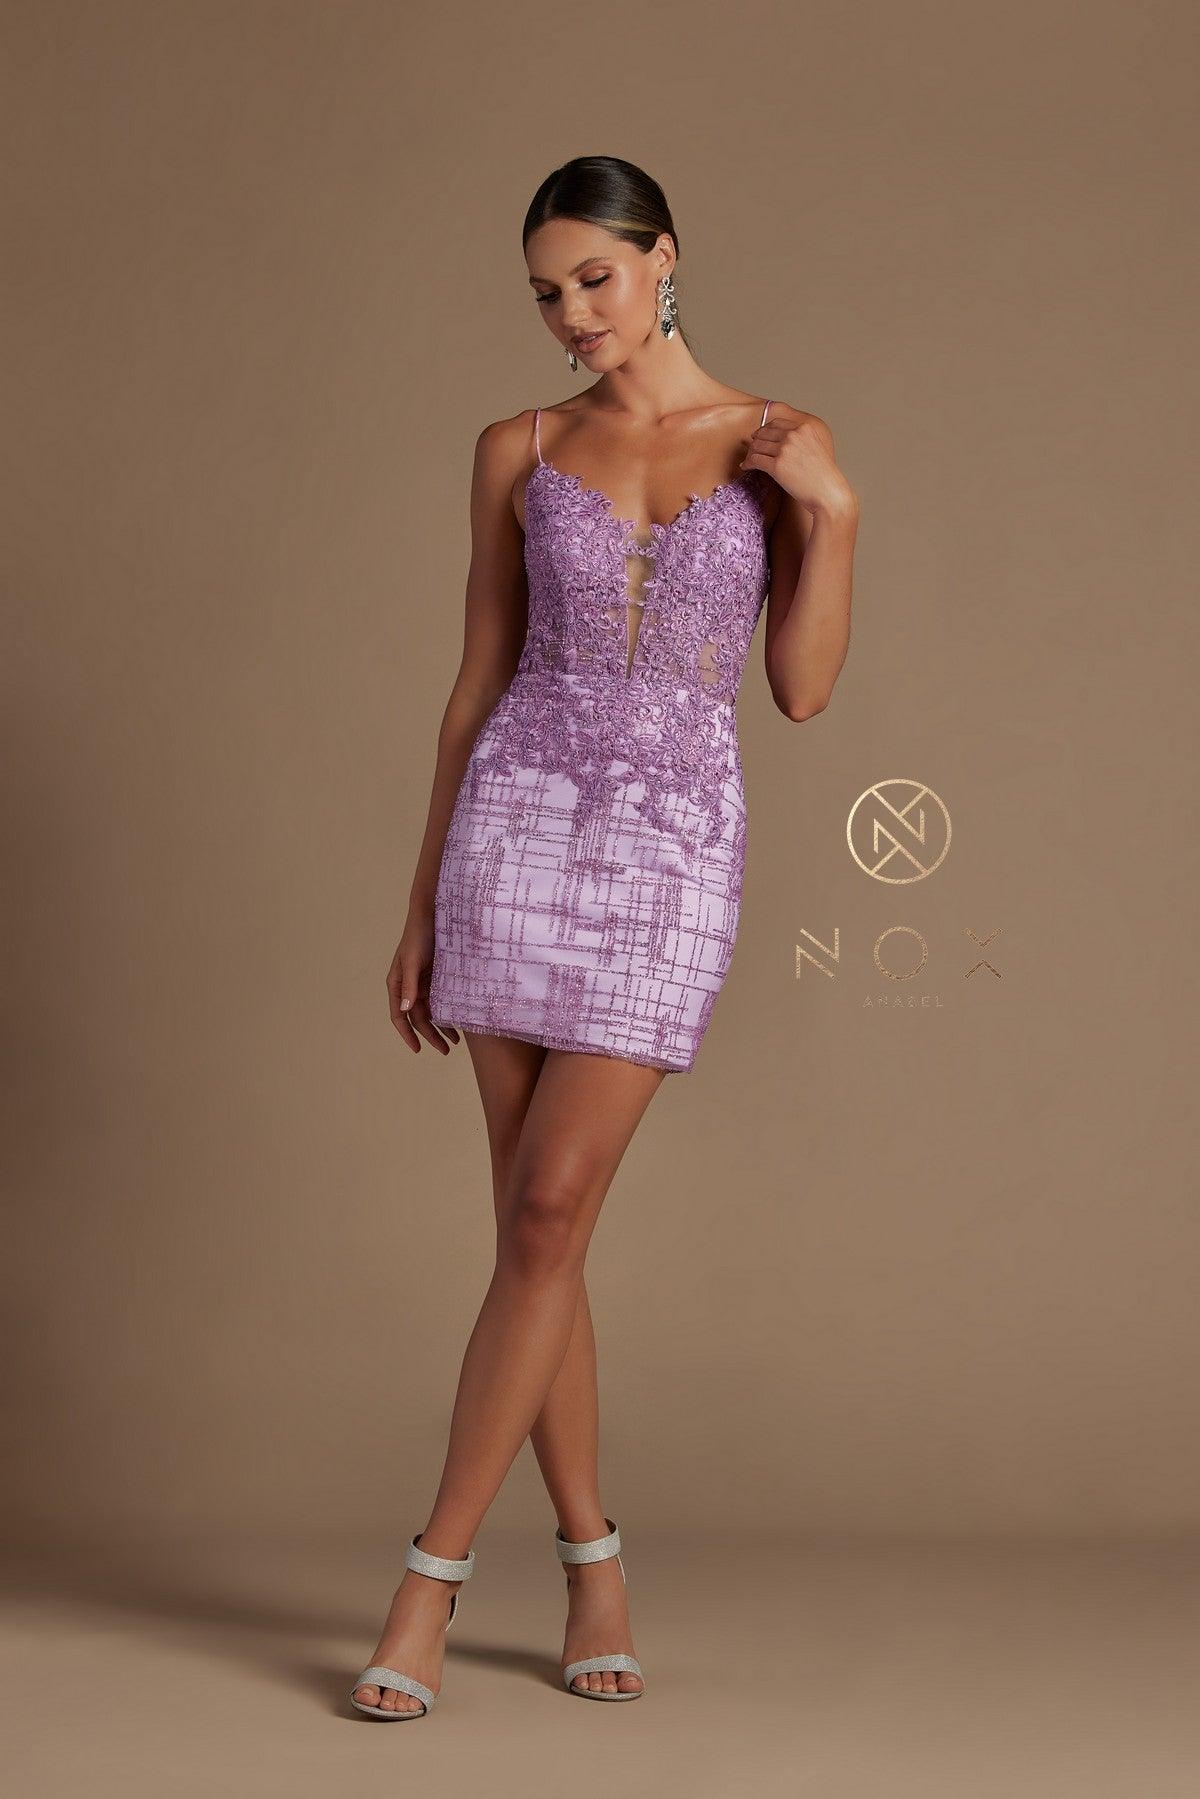 Short Spaghetti Strap Homecoming Cocktail Dress R700 - The Dress Outlet